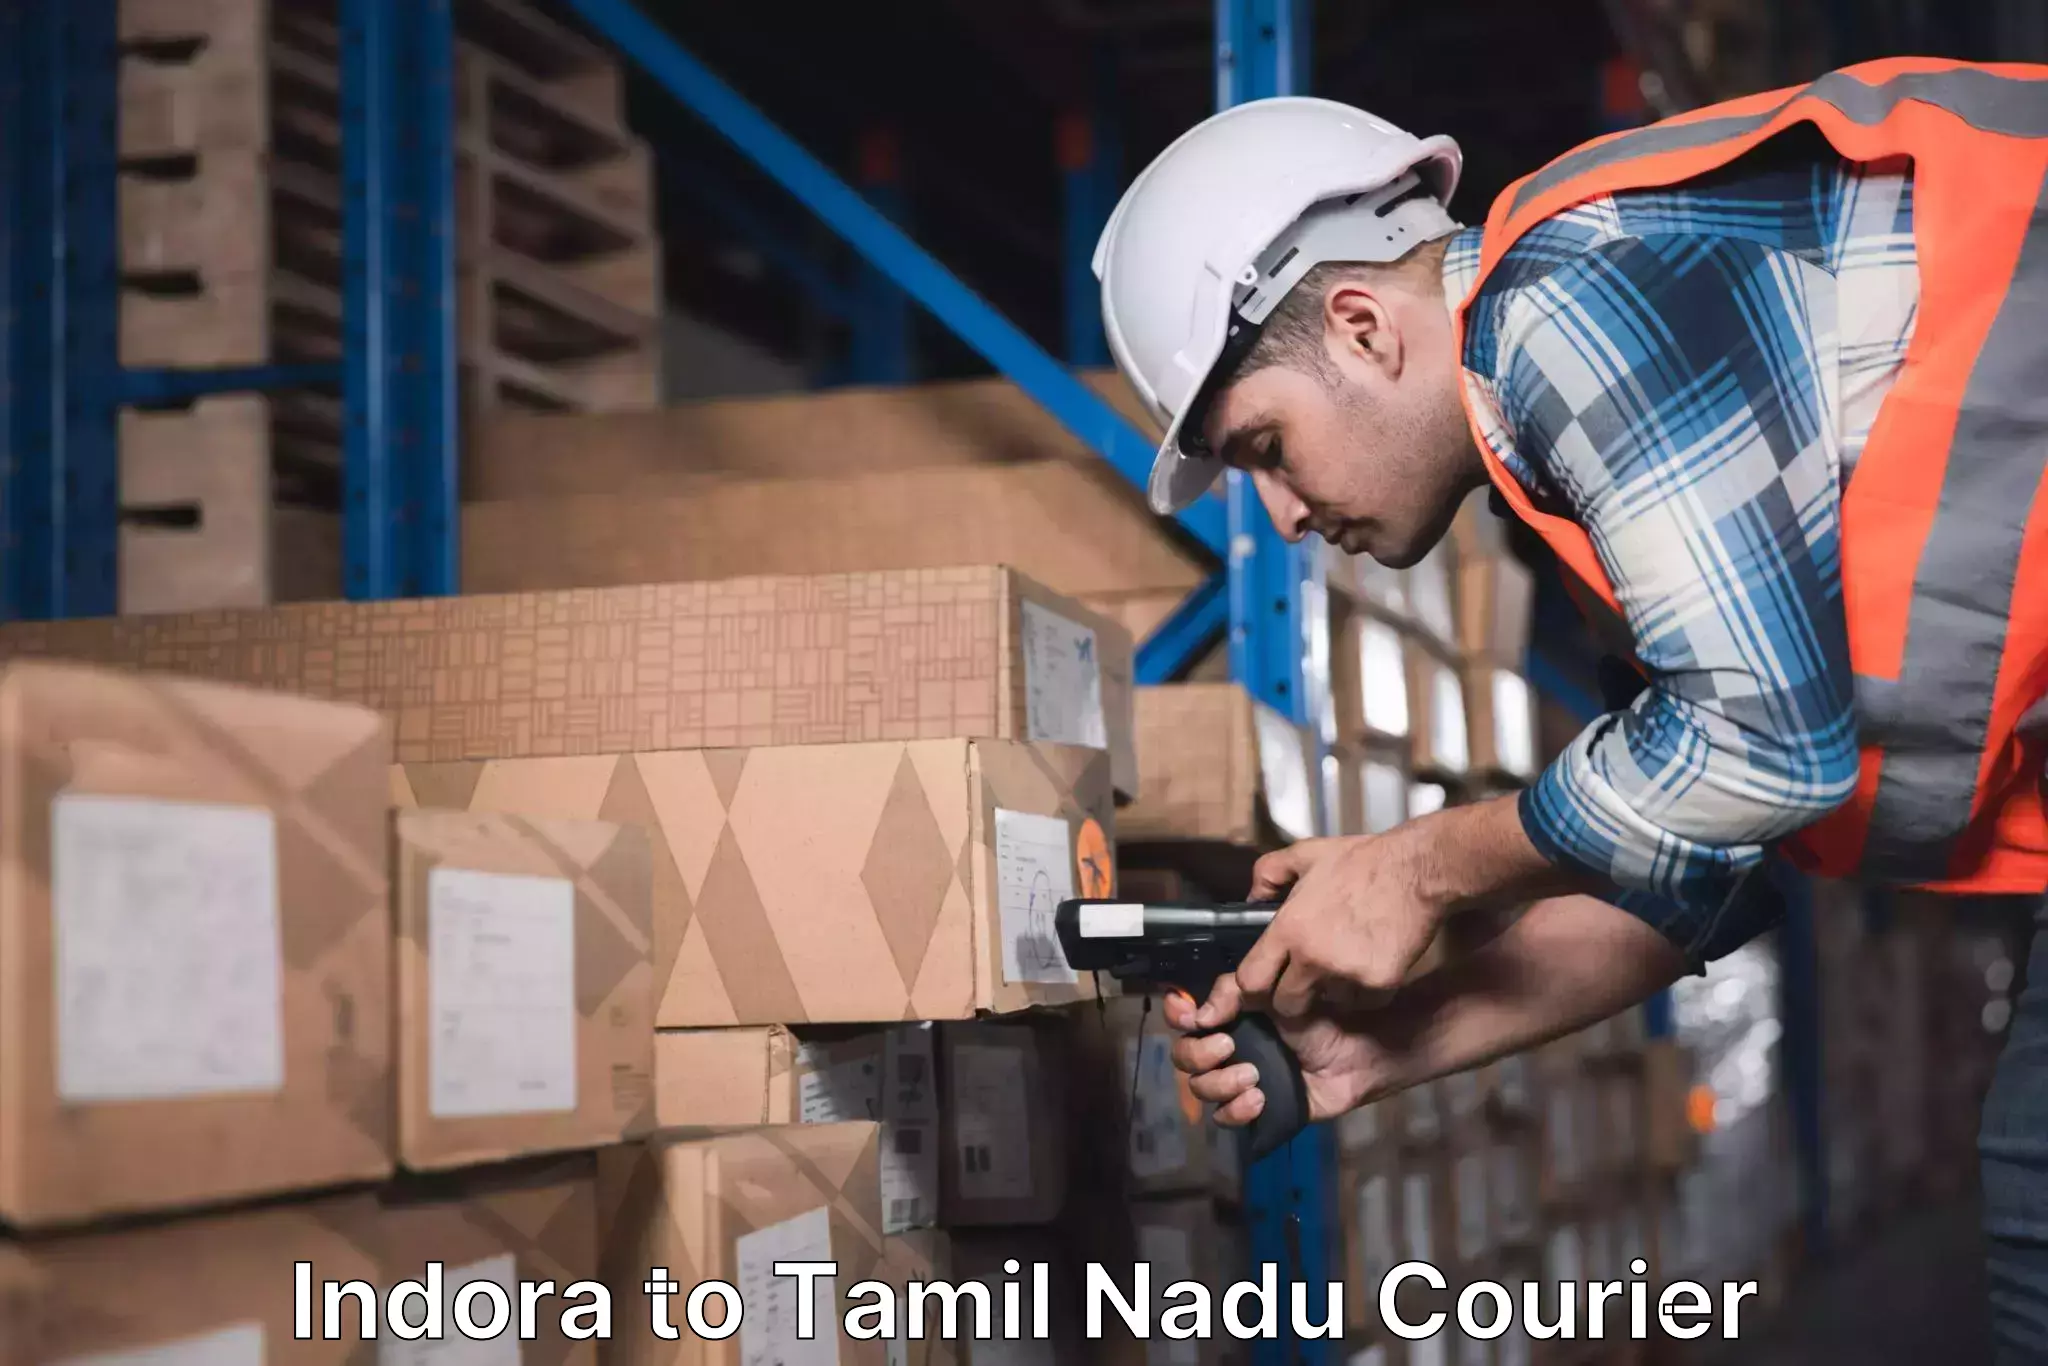 24/7 courier service Indora to Ennore Port Chennai